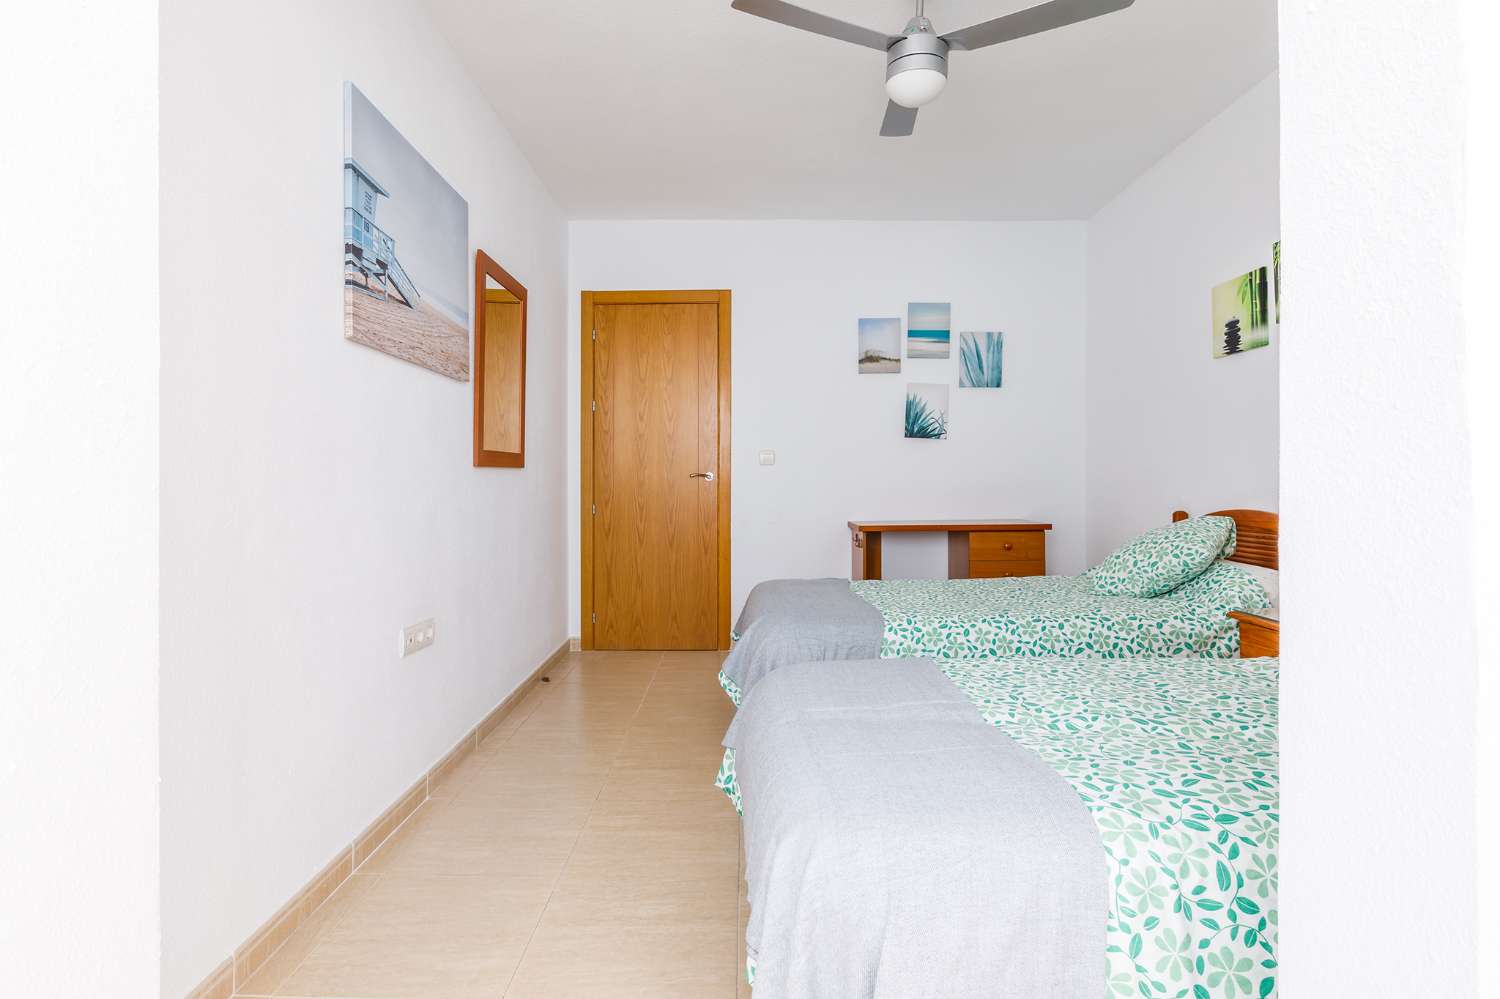 Apartment with two bedrooms, two bathrooms in the center of Torre del Mar, available in winter